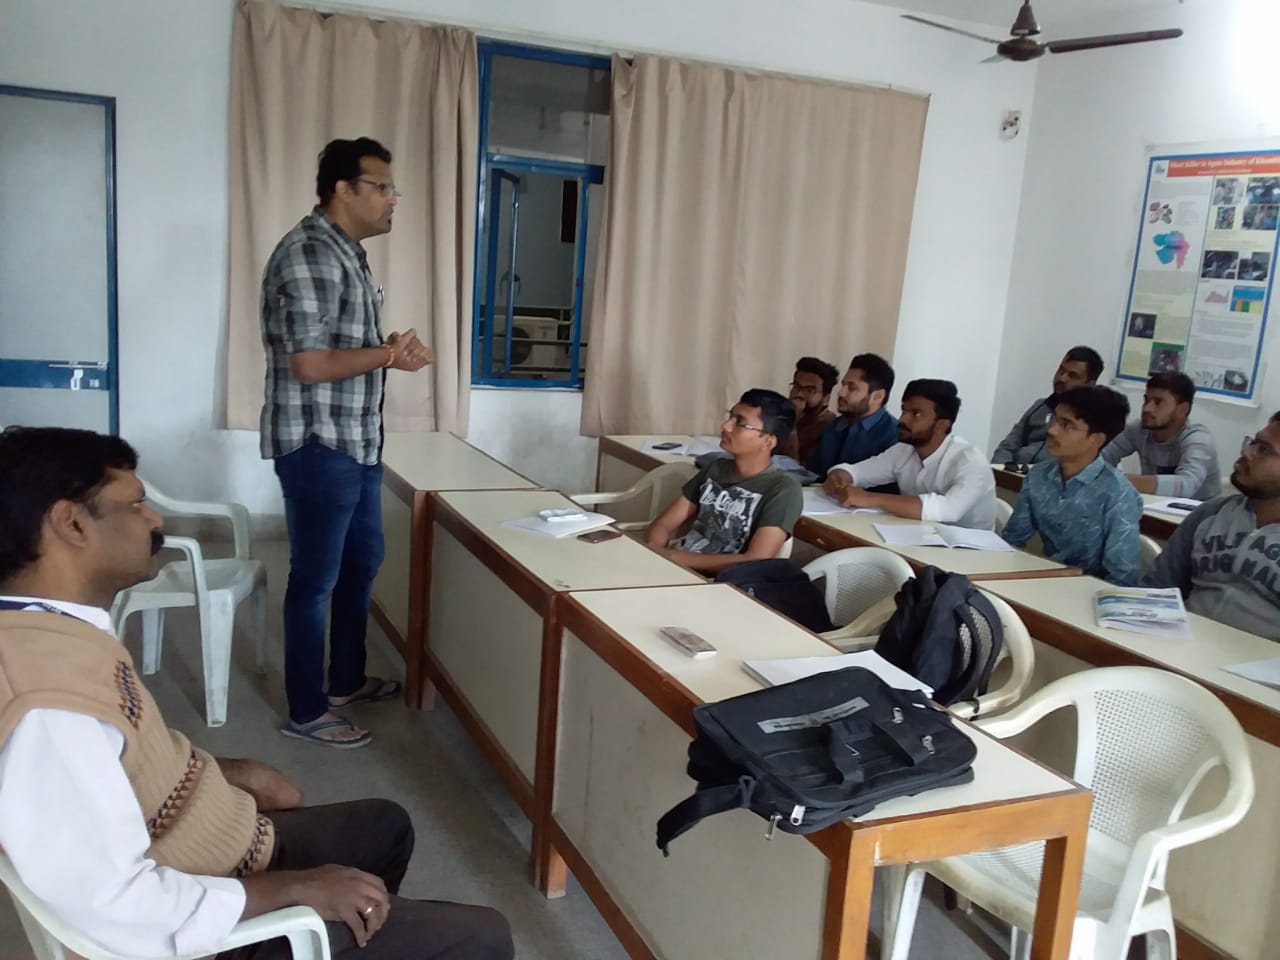 Mr. Dhruvit Mehta our Alumni with Mittal -HPCL Refinery Bhatinda giving an expert lecture on Ih in refinery.